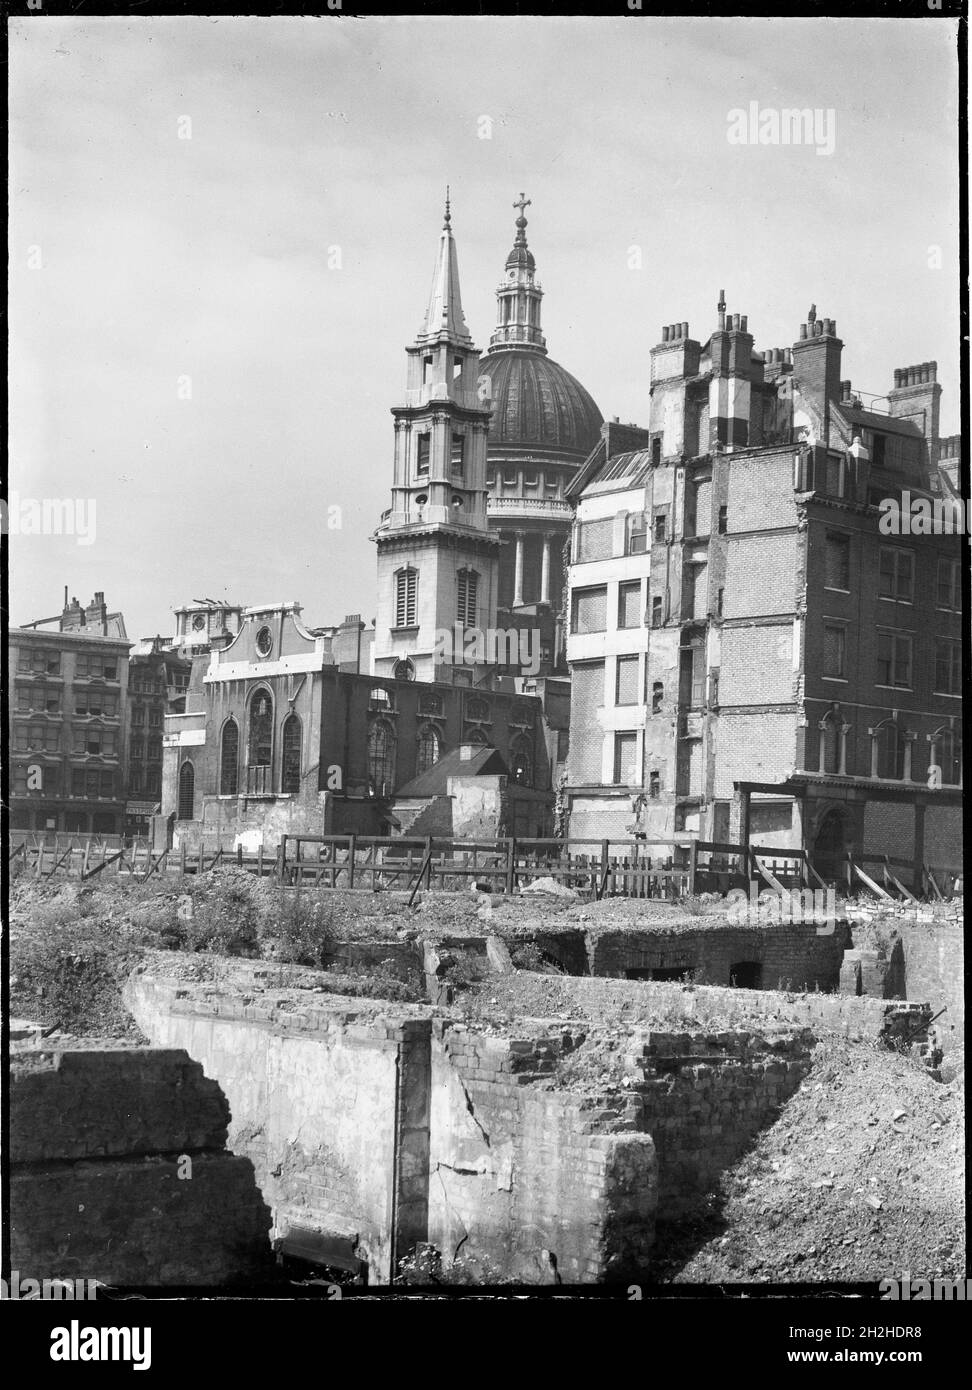 St Paul's Cathedral, St Paul's Churchyard, City of London, City and County of the City of London, Greater London Authority, 1941-1945. A view looking south-west across a bomb damaged landscape towards the Church of St Verdast-alias-Foster with St Paul's Cathedral beyond. The Church of St Verdast-alias-Foster was rebuilt by Christopher Wren after the Great Fire of London in 1666. In the Second World War it was gutted by fire during the Blitz in 1940-41 and was later rebuilt after the war with work starting in 1953. St Paul's Cathedral survived the bombing raids but other buildings in the area w Stock Photo